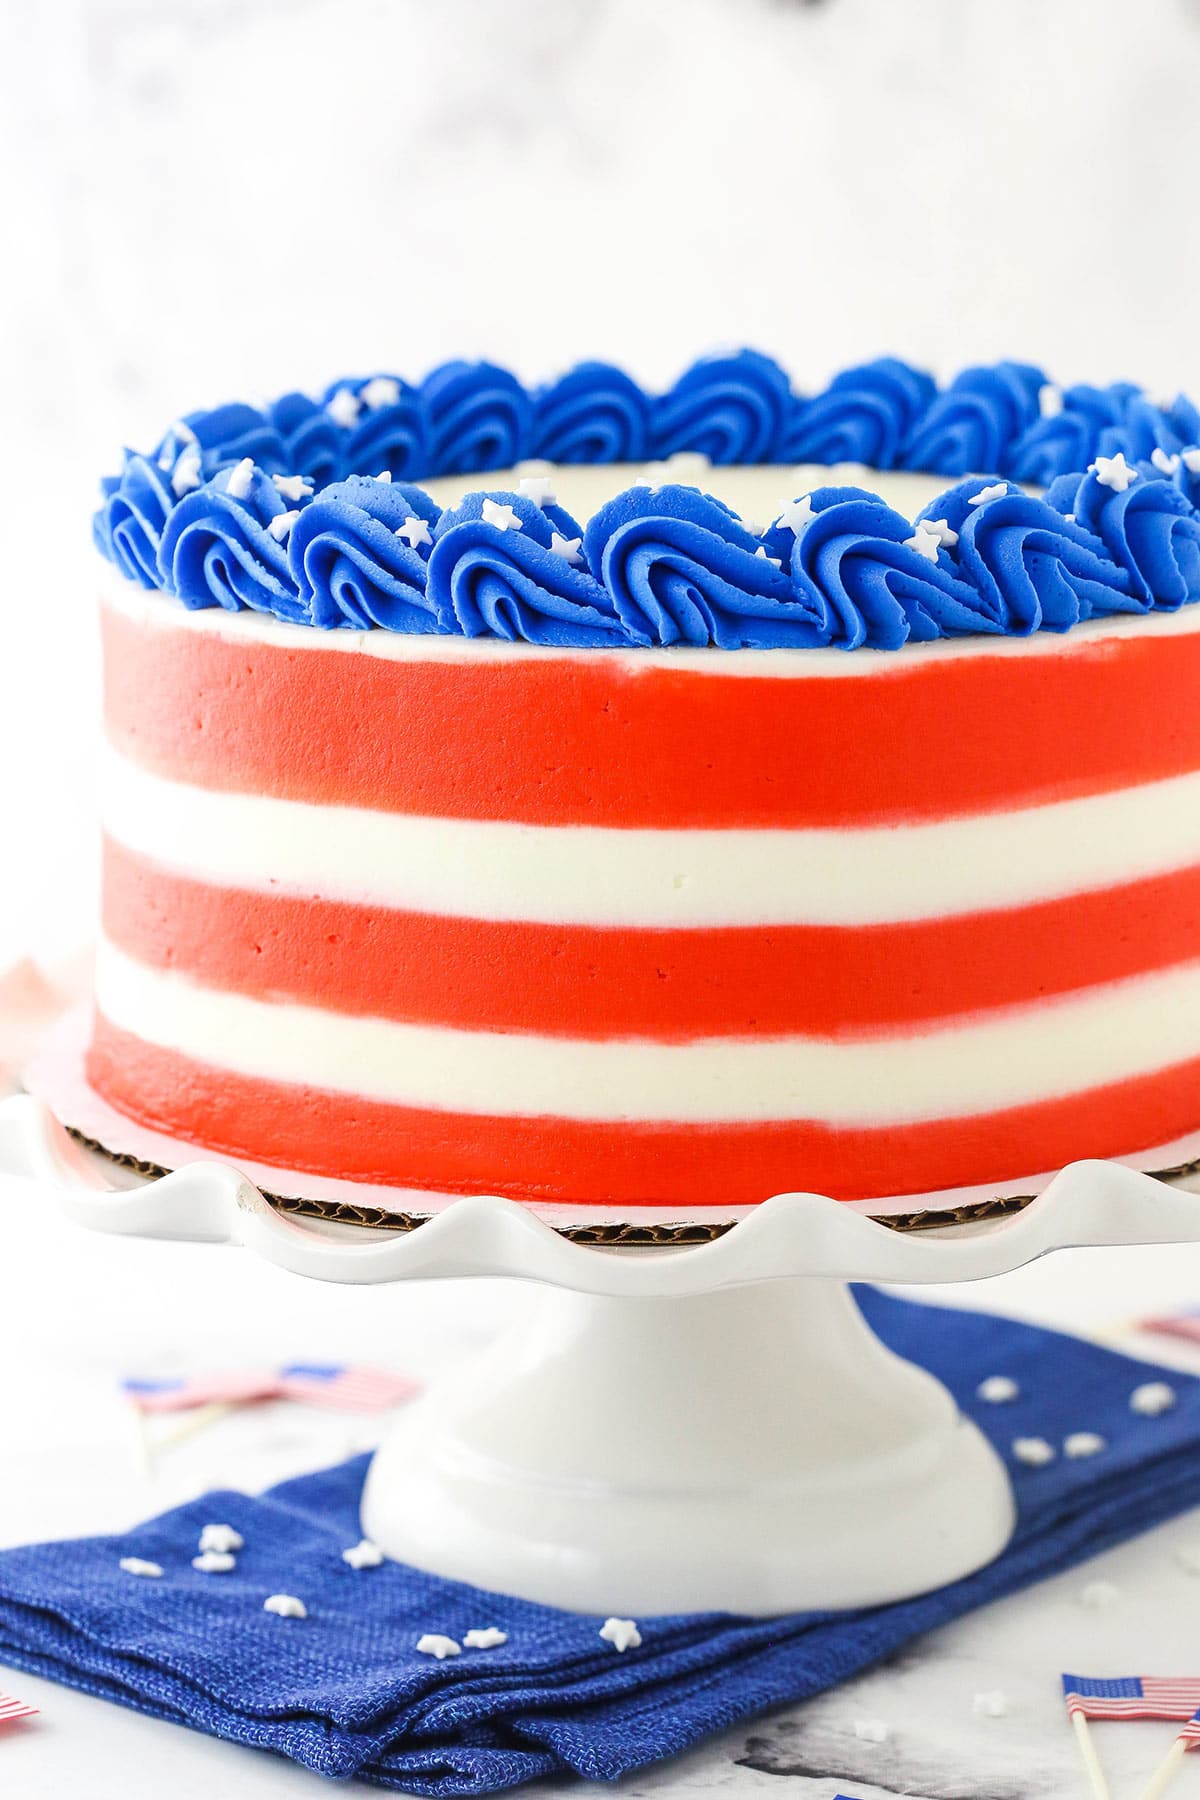 An America-themed marble cake on a plastic cake stand on top of a blue kitchen towel